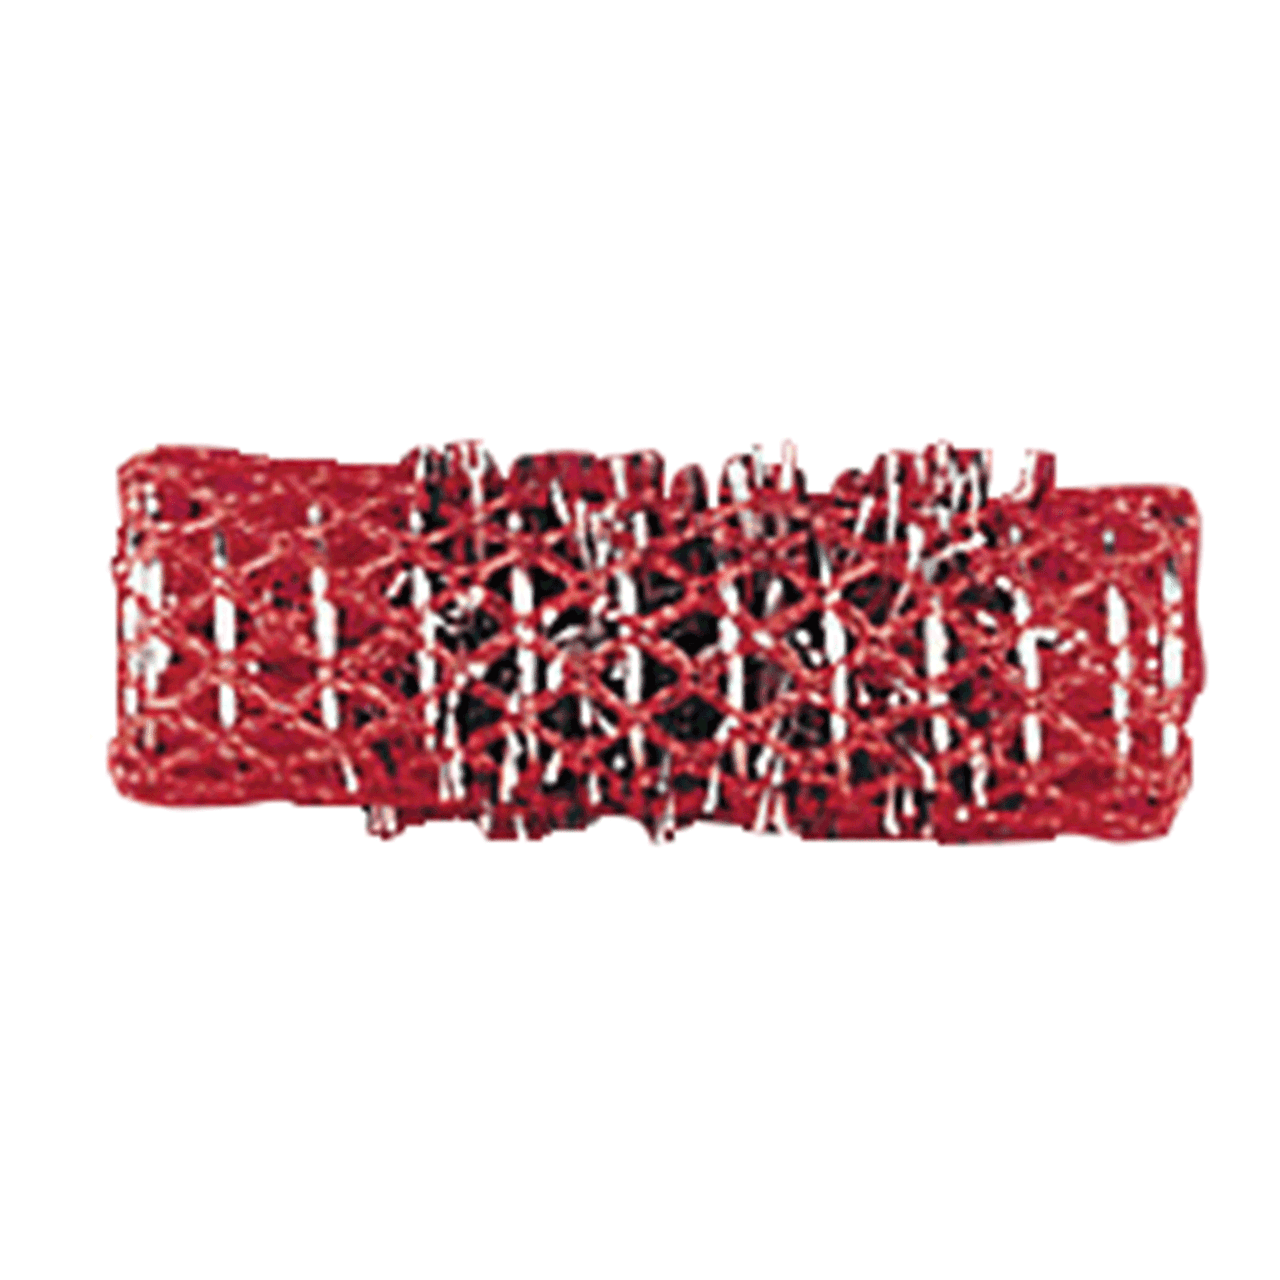 Dannyco Sundries BaByliss Pro Red Italian Large Brush Rollers - 12 Pack